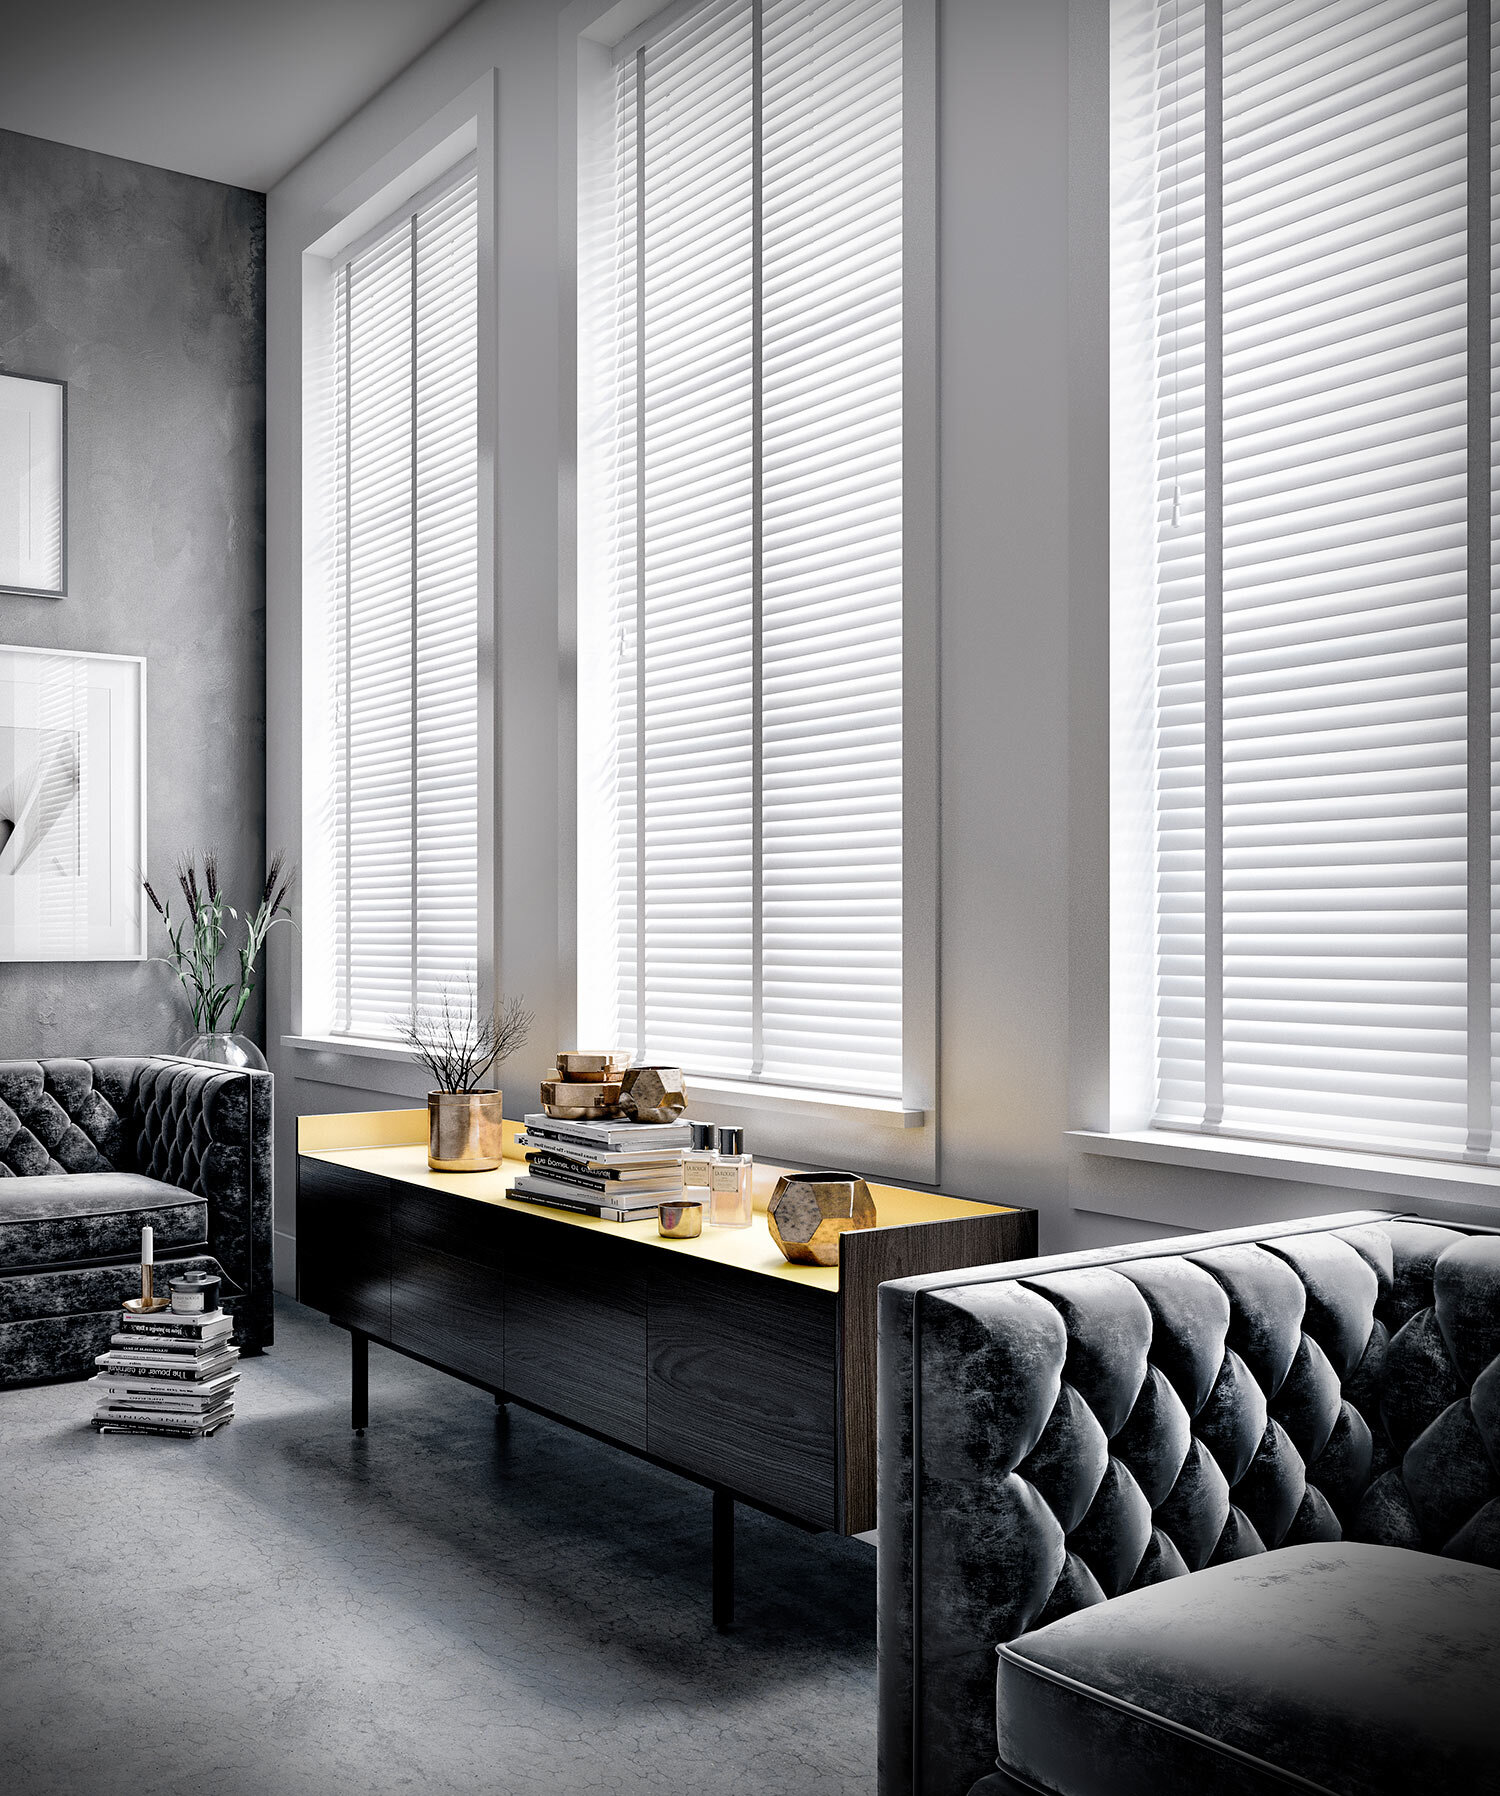 Electric Window Blinds Romsey. Electric blinds can either be mains or battery powered. We offer a great retro-fit rechargeable battery solution for all types of remote controlled window blinds.